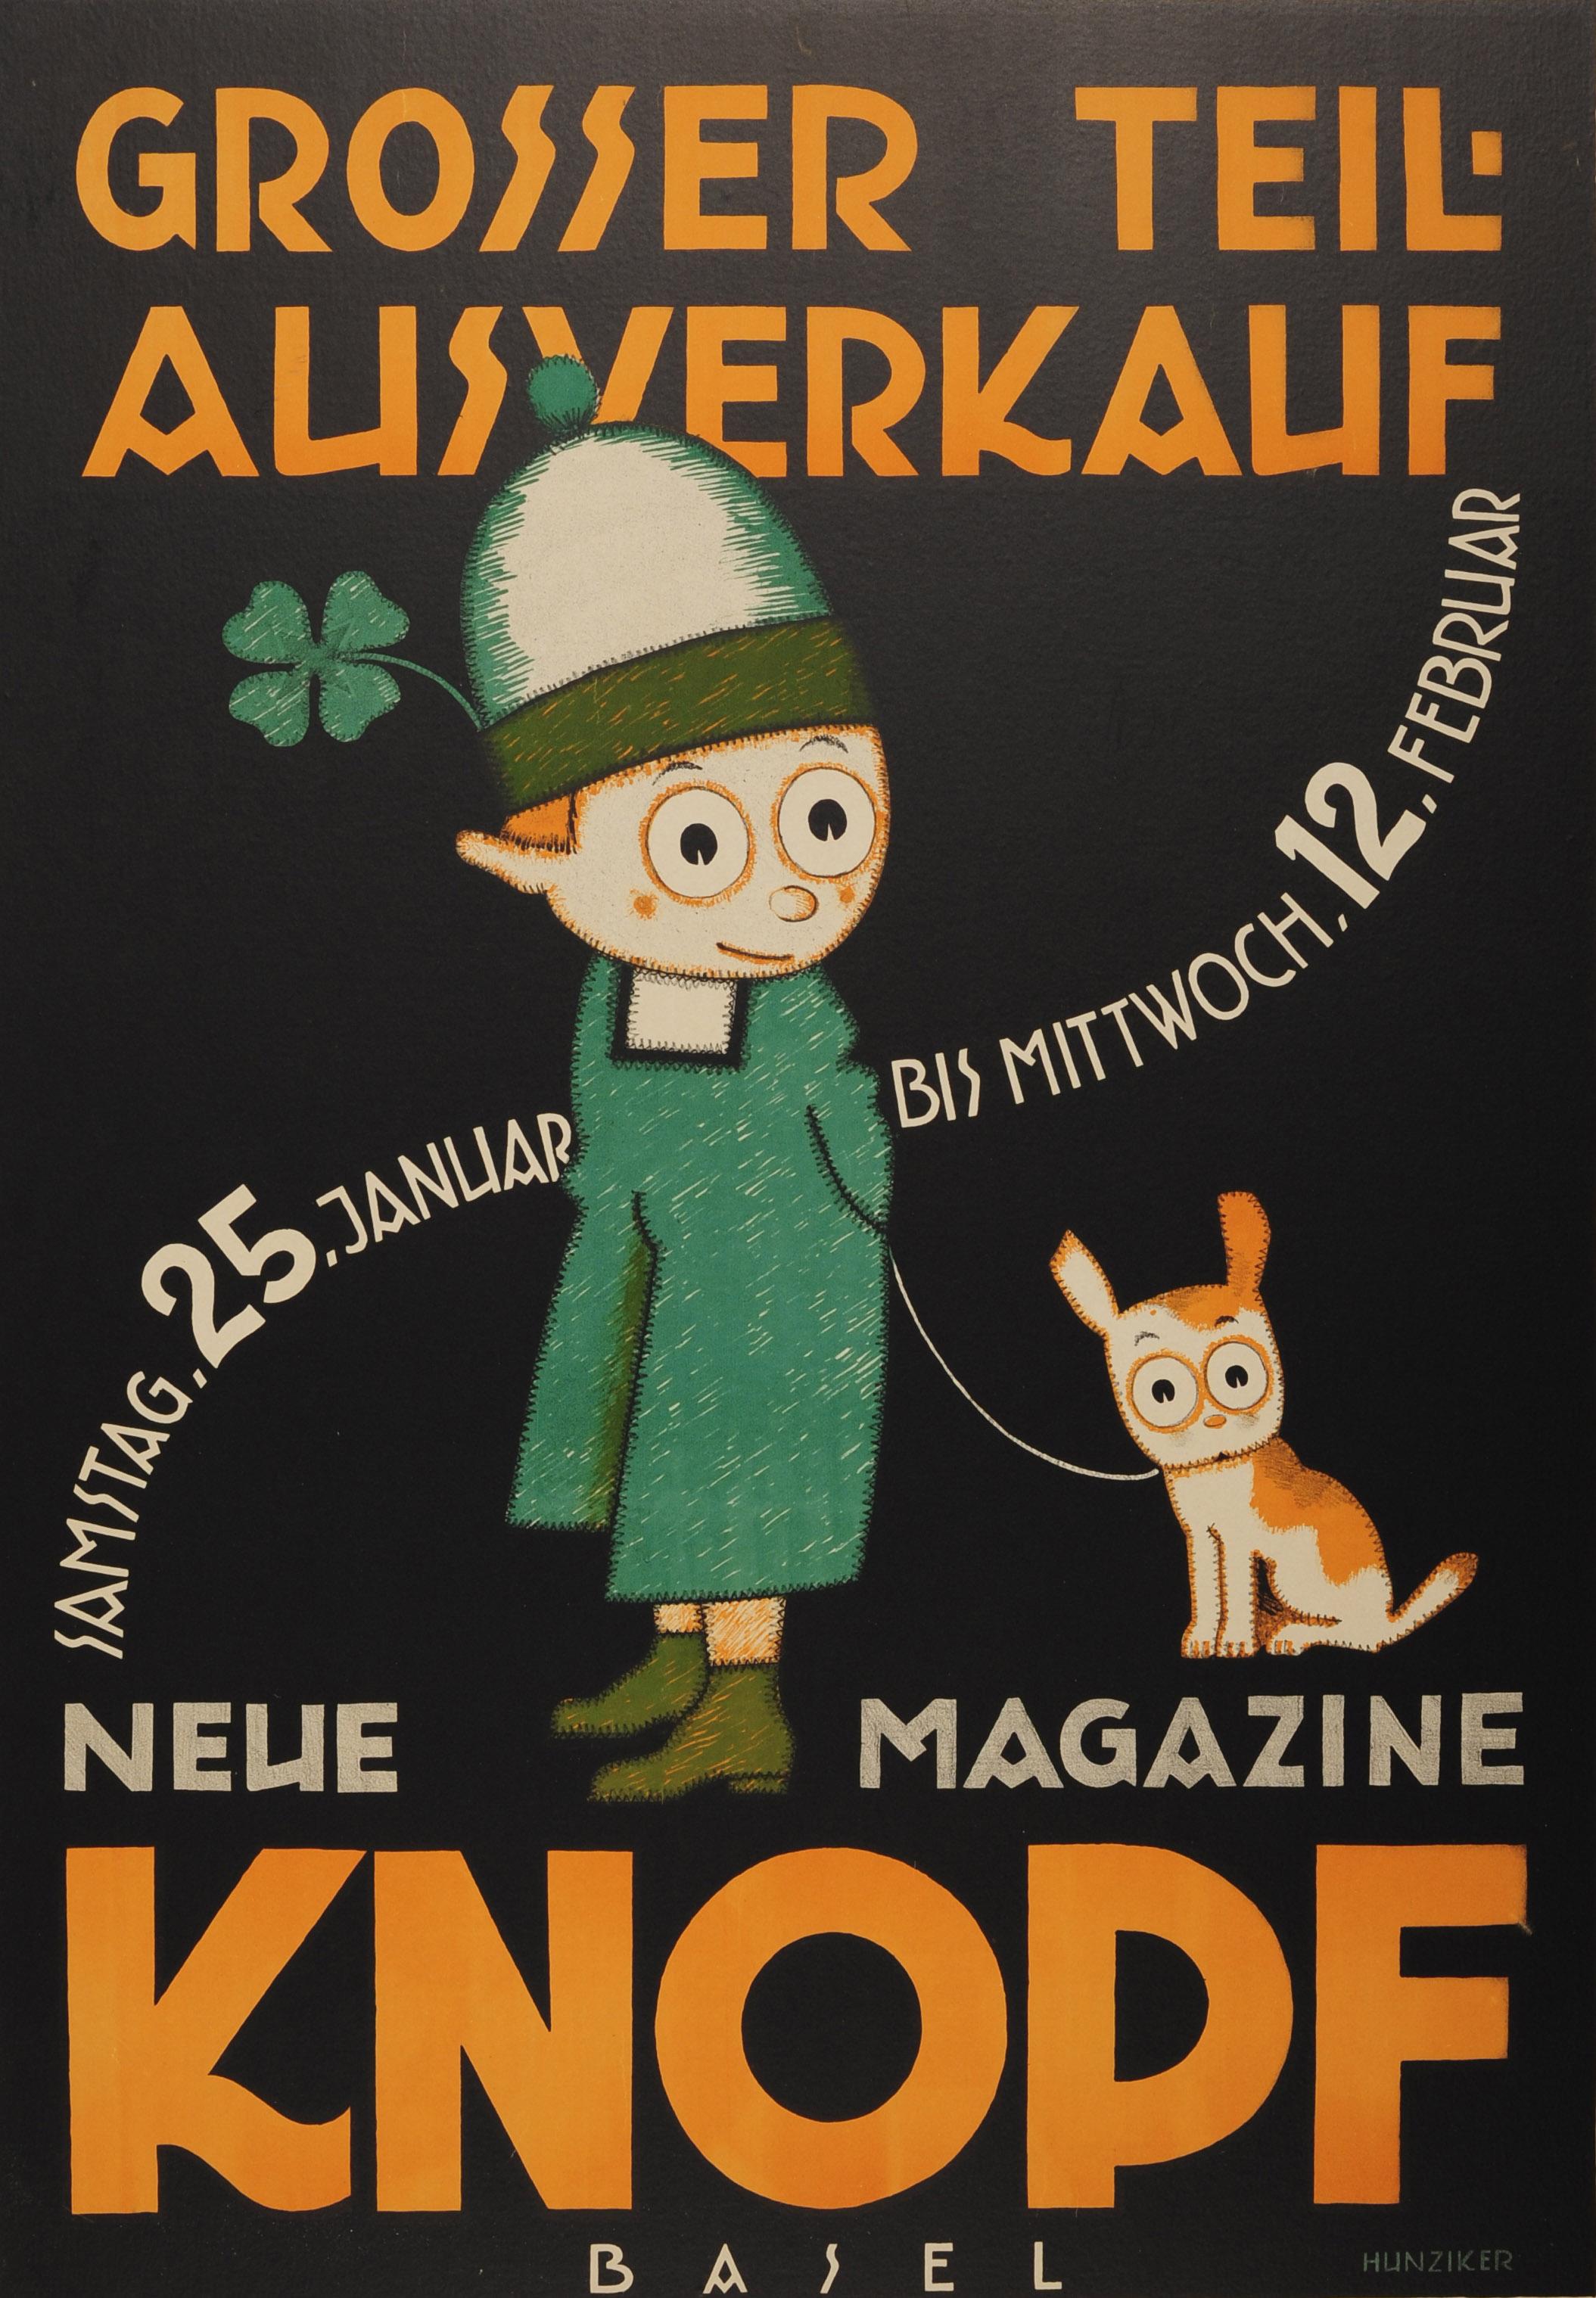 Original vintage German advertising poster for a sale in the Knopf children's shop in Basel featuring a fun image by Gerold Hunziker (1894-1980) of a dog on a leash held by a child like leprechaun character wearing a green outfit with a four leaf